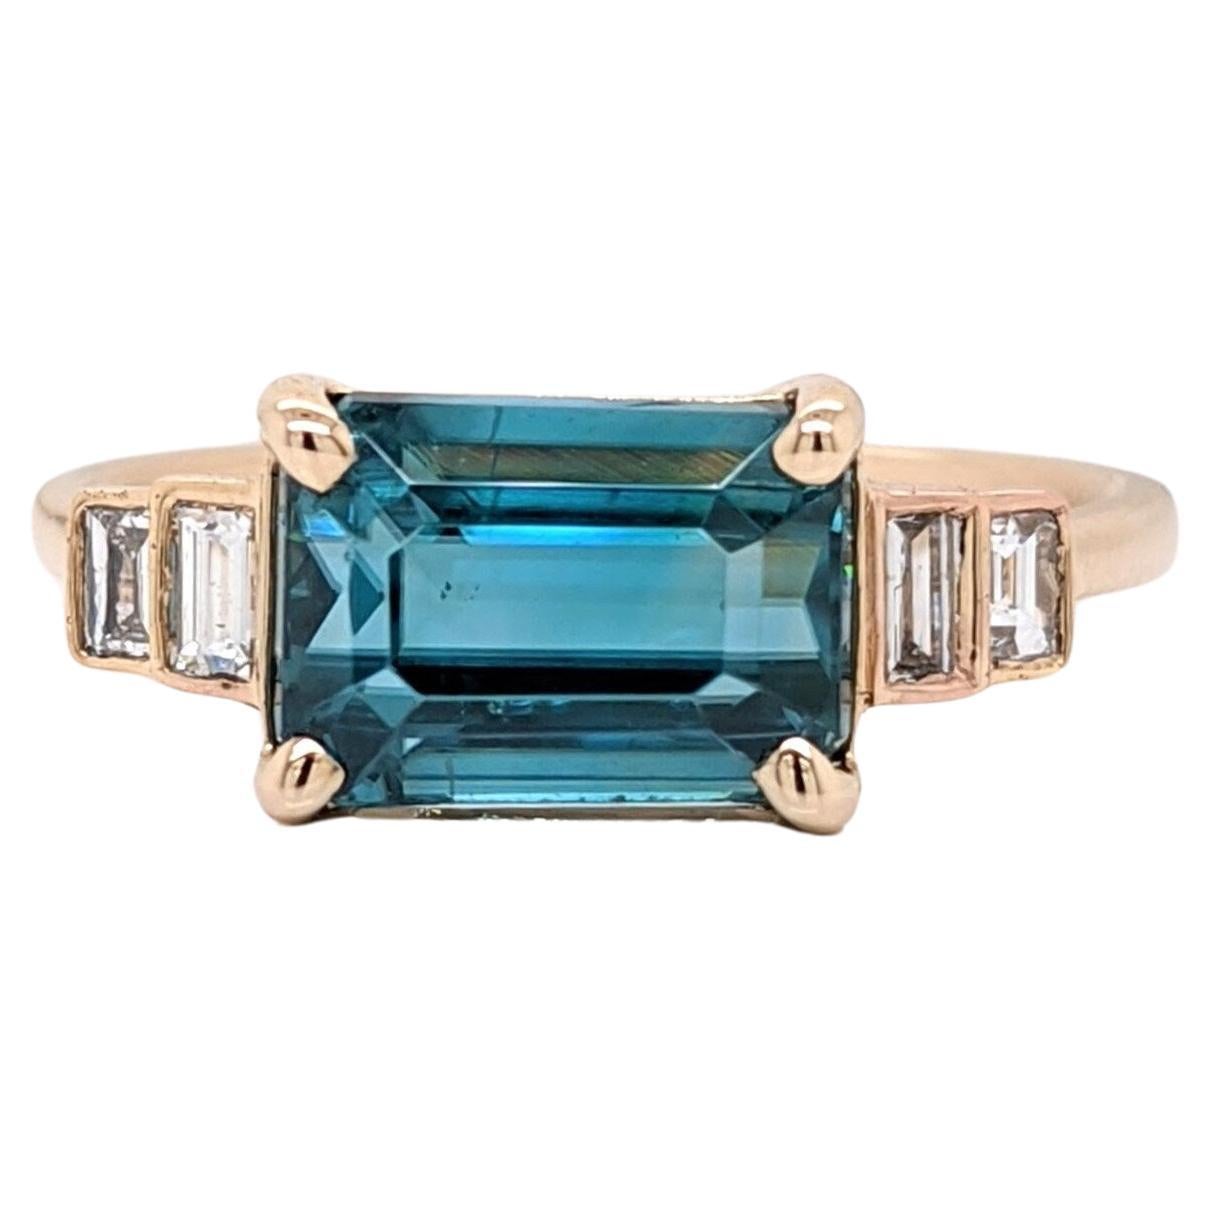 4.77ct Zircon w Baguette Diamond Accents in Solid 14K Gold Emerald Cut 9x6.5mm For Sale